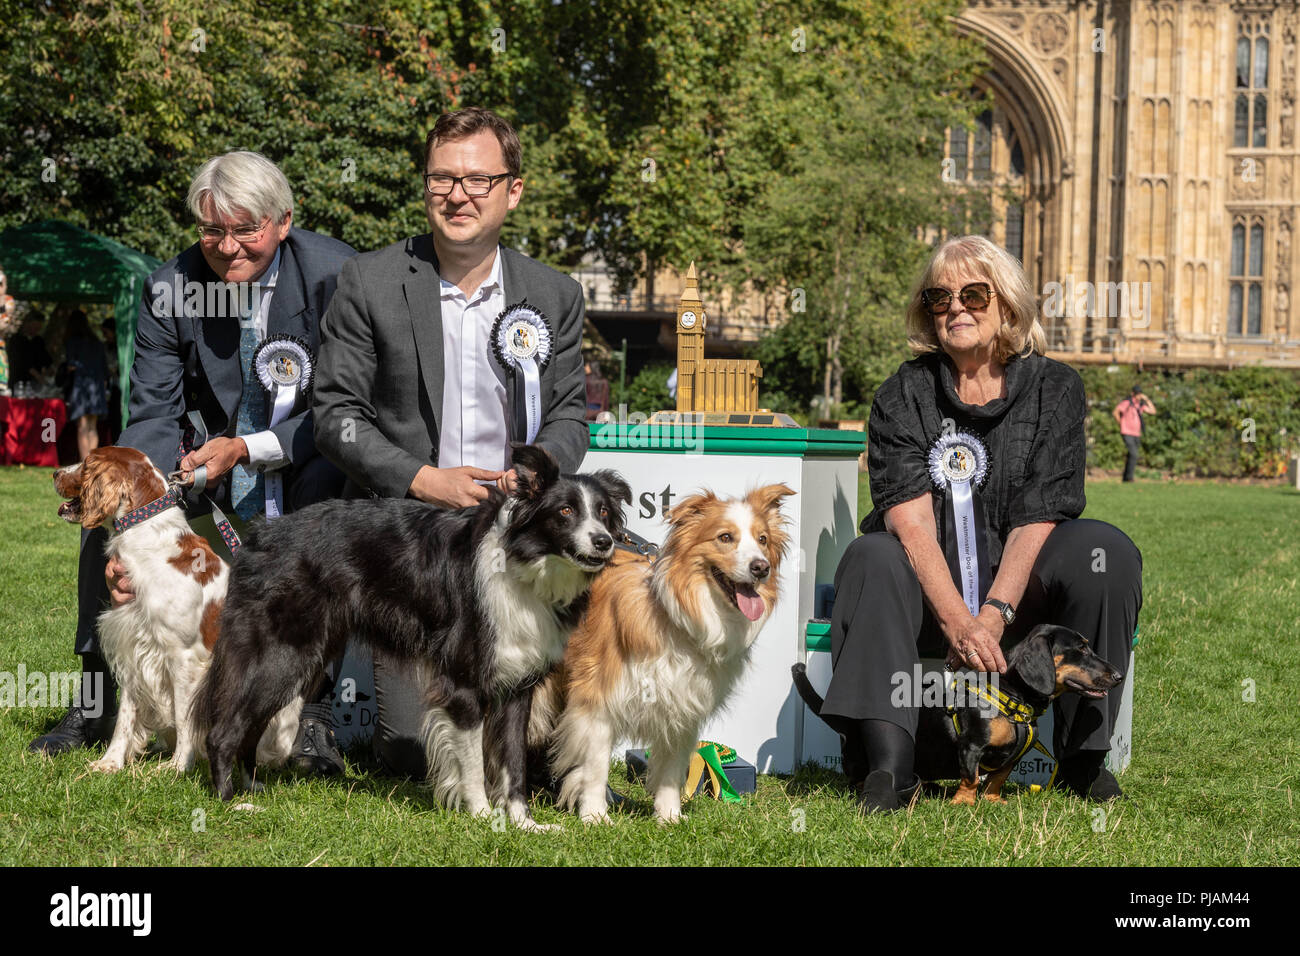 London, UK. 6th September 2018 Westminster Dog of the year event in Victoria Tower Gardens, London, UK. The winners of the competition, Andrew Mitchell MP who came second, (left) Alex Norris MP, 1st, (center) and Cheryly Gillian MP third Credit Ian Davidson/Alamy Live News Stock Photo